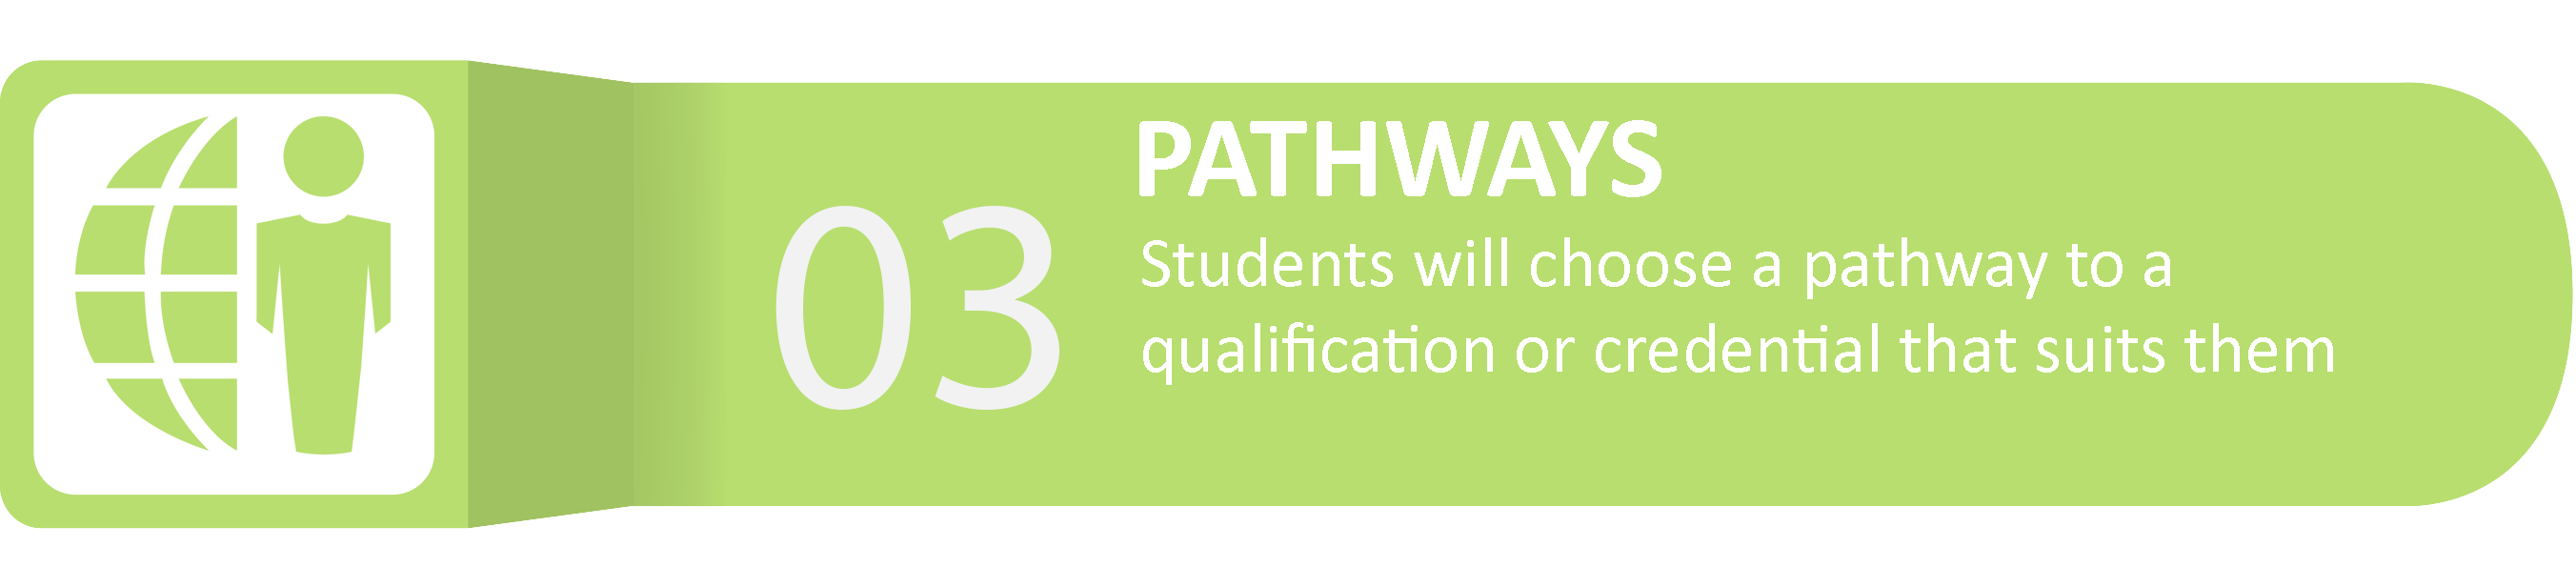 Learning Pathways - Students will choose a pathway to a qualification ore credential that suits them